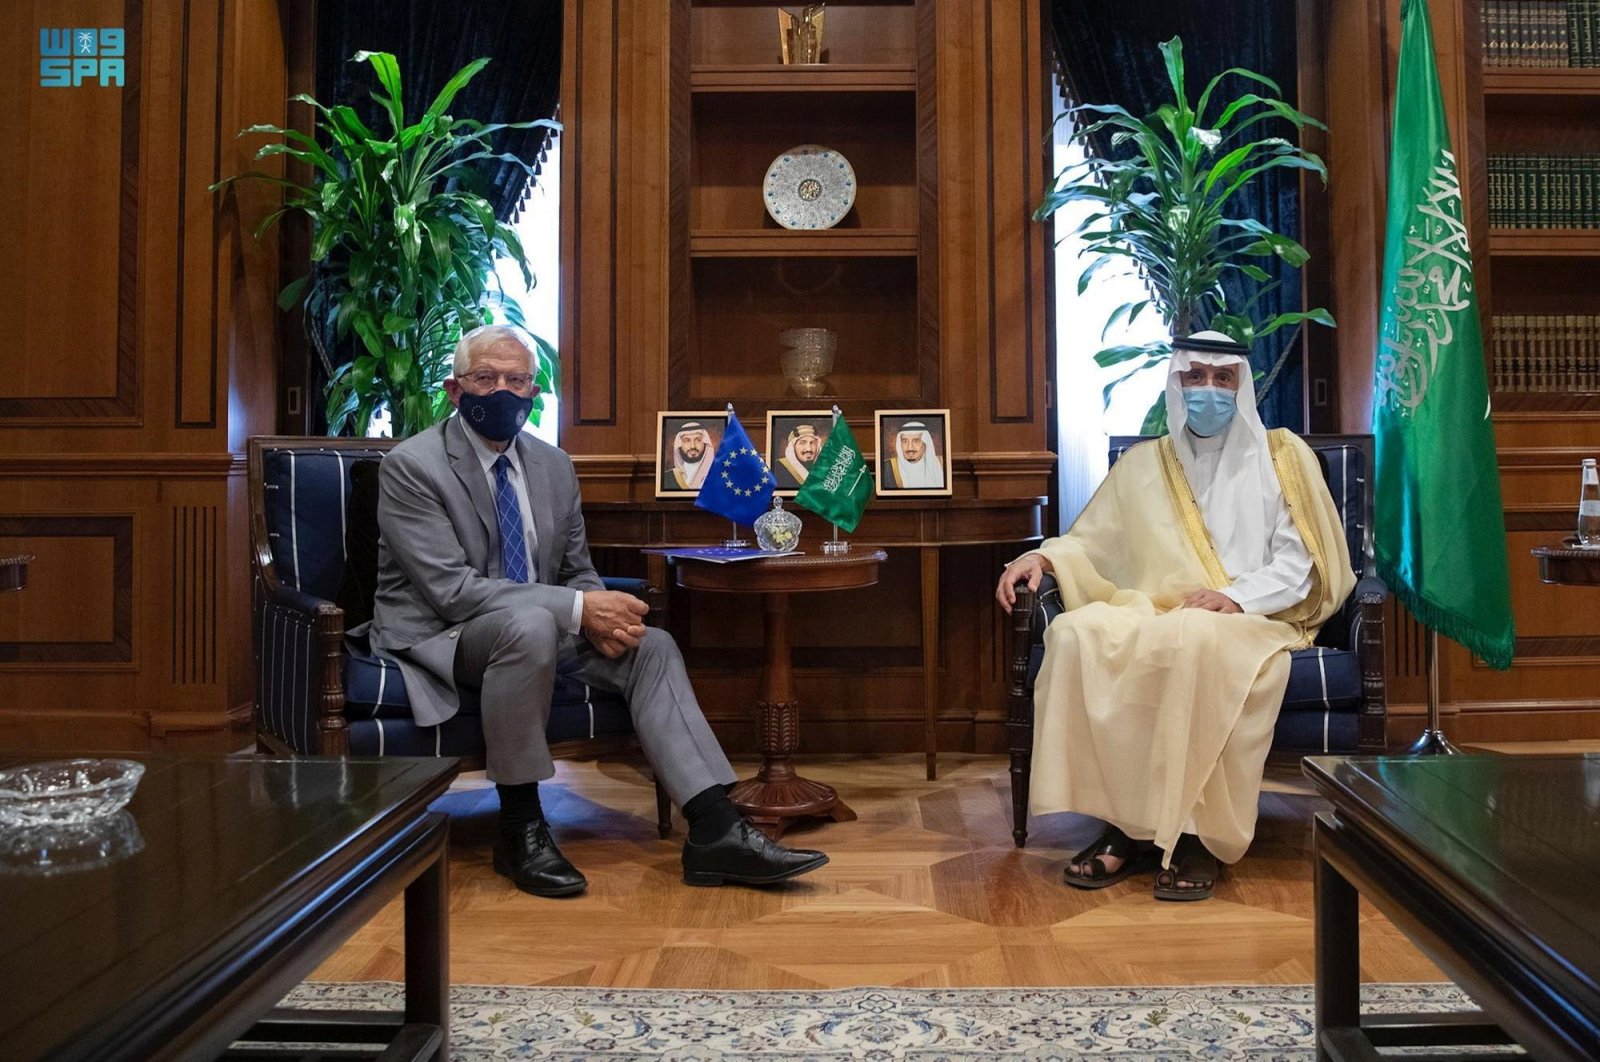 EU foreign policy chief Josep Borrell (L) meets with Saudi Arabia's Minister of State for Foreign Affairs Adel al-Jubeir in Riyadh, Saudi Arabia, Oct. 3, 2021. (Reuters Photo)